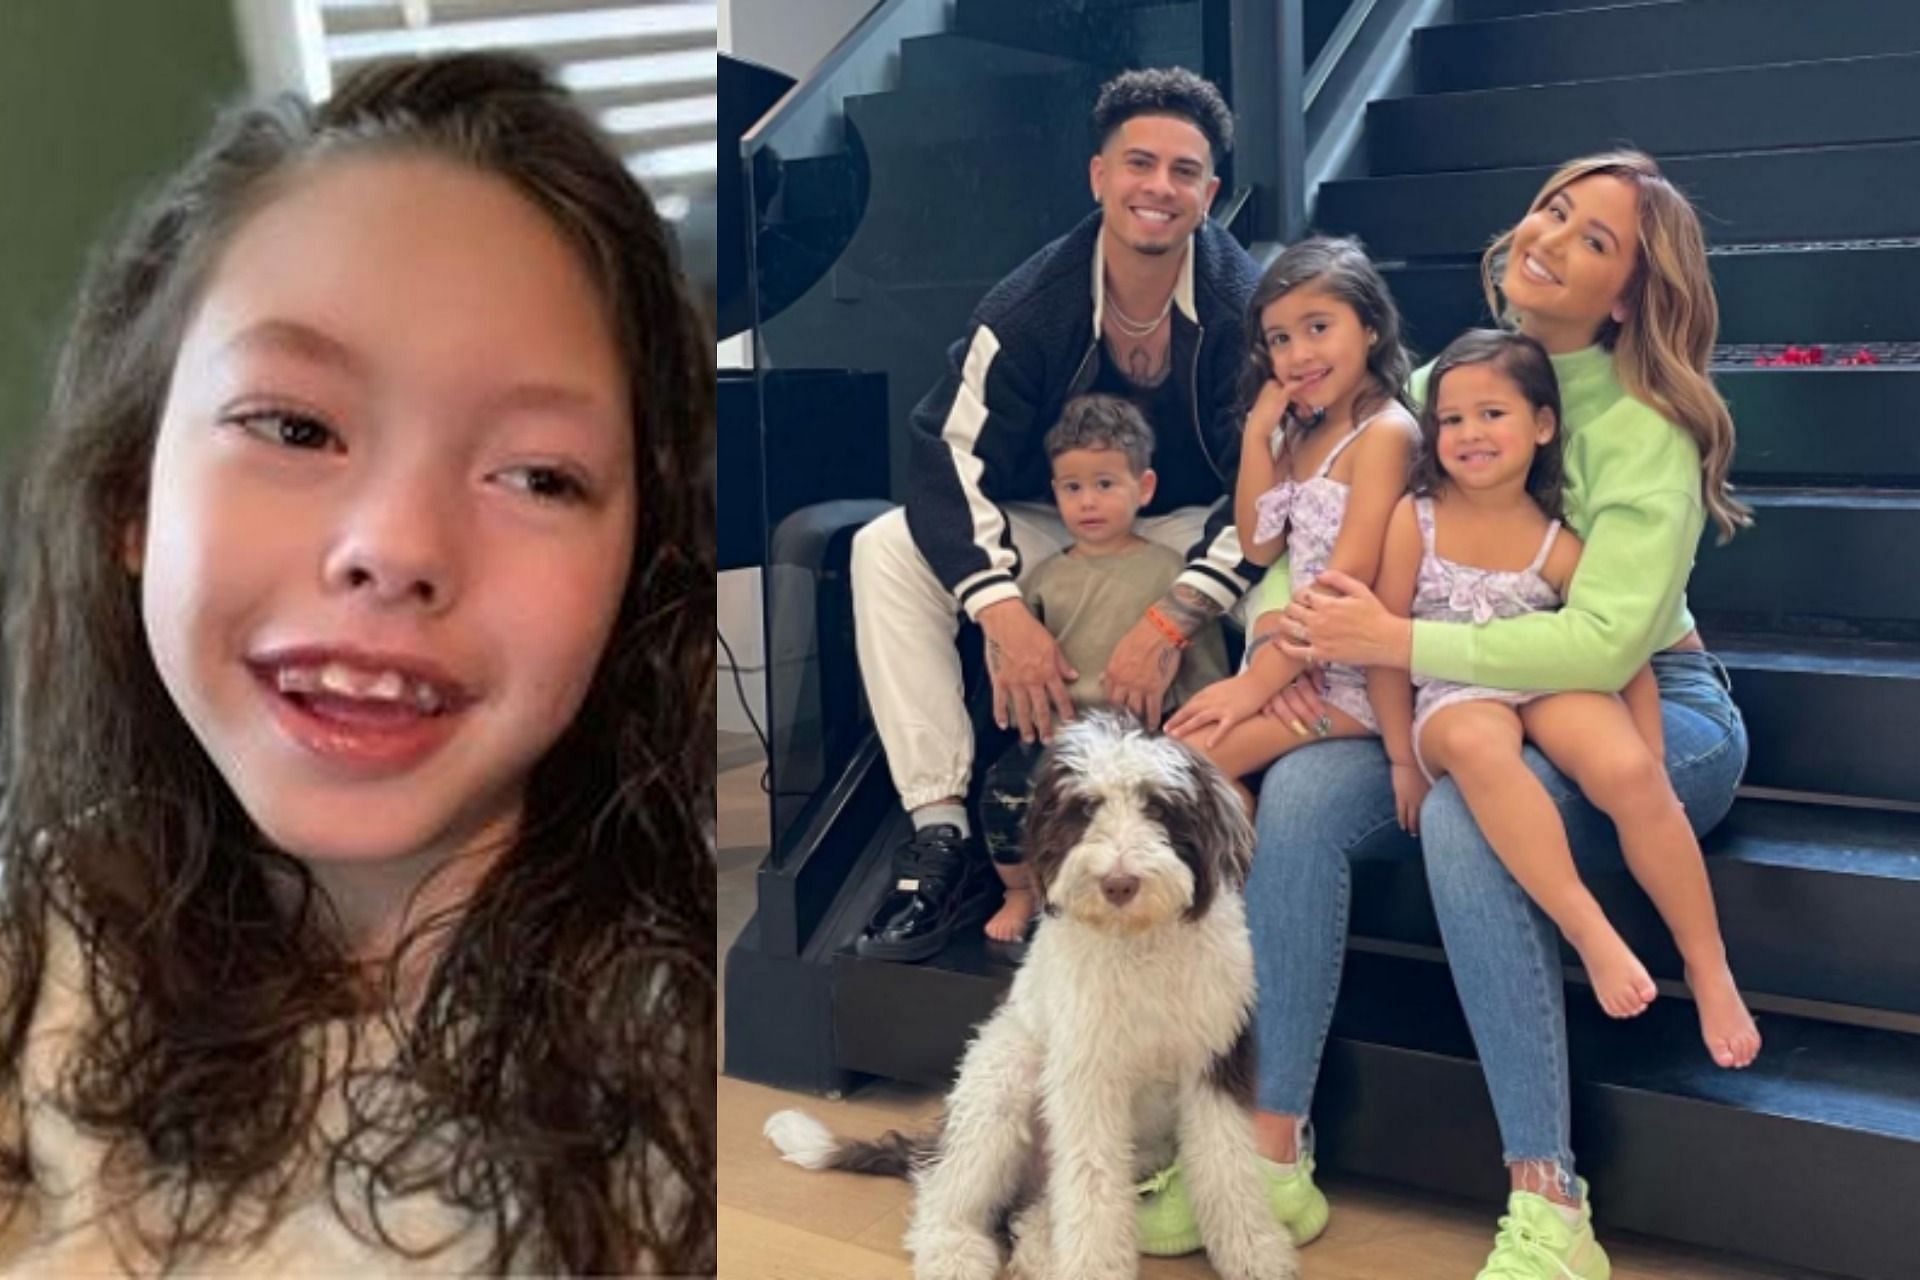 The ACE Family pay tribute to 11-year-old fan who passed away (Image via tributes &amp; austinmcbroom/Instagram)